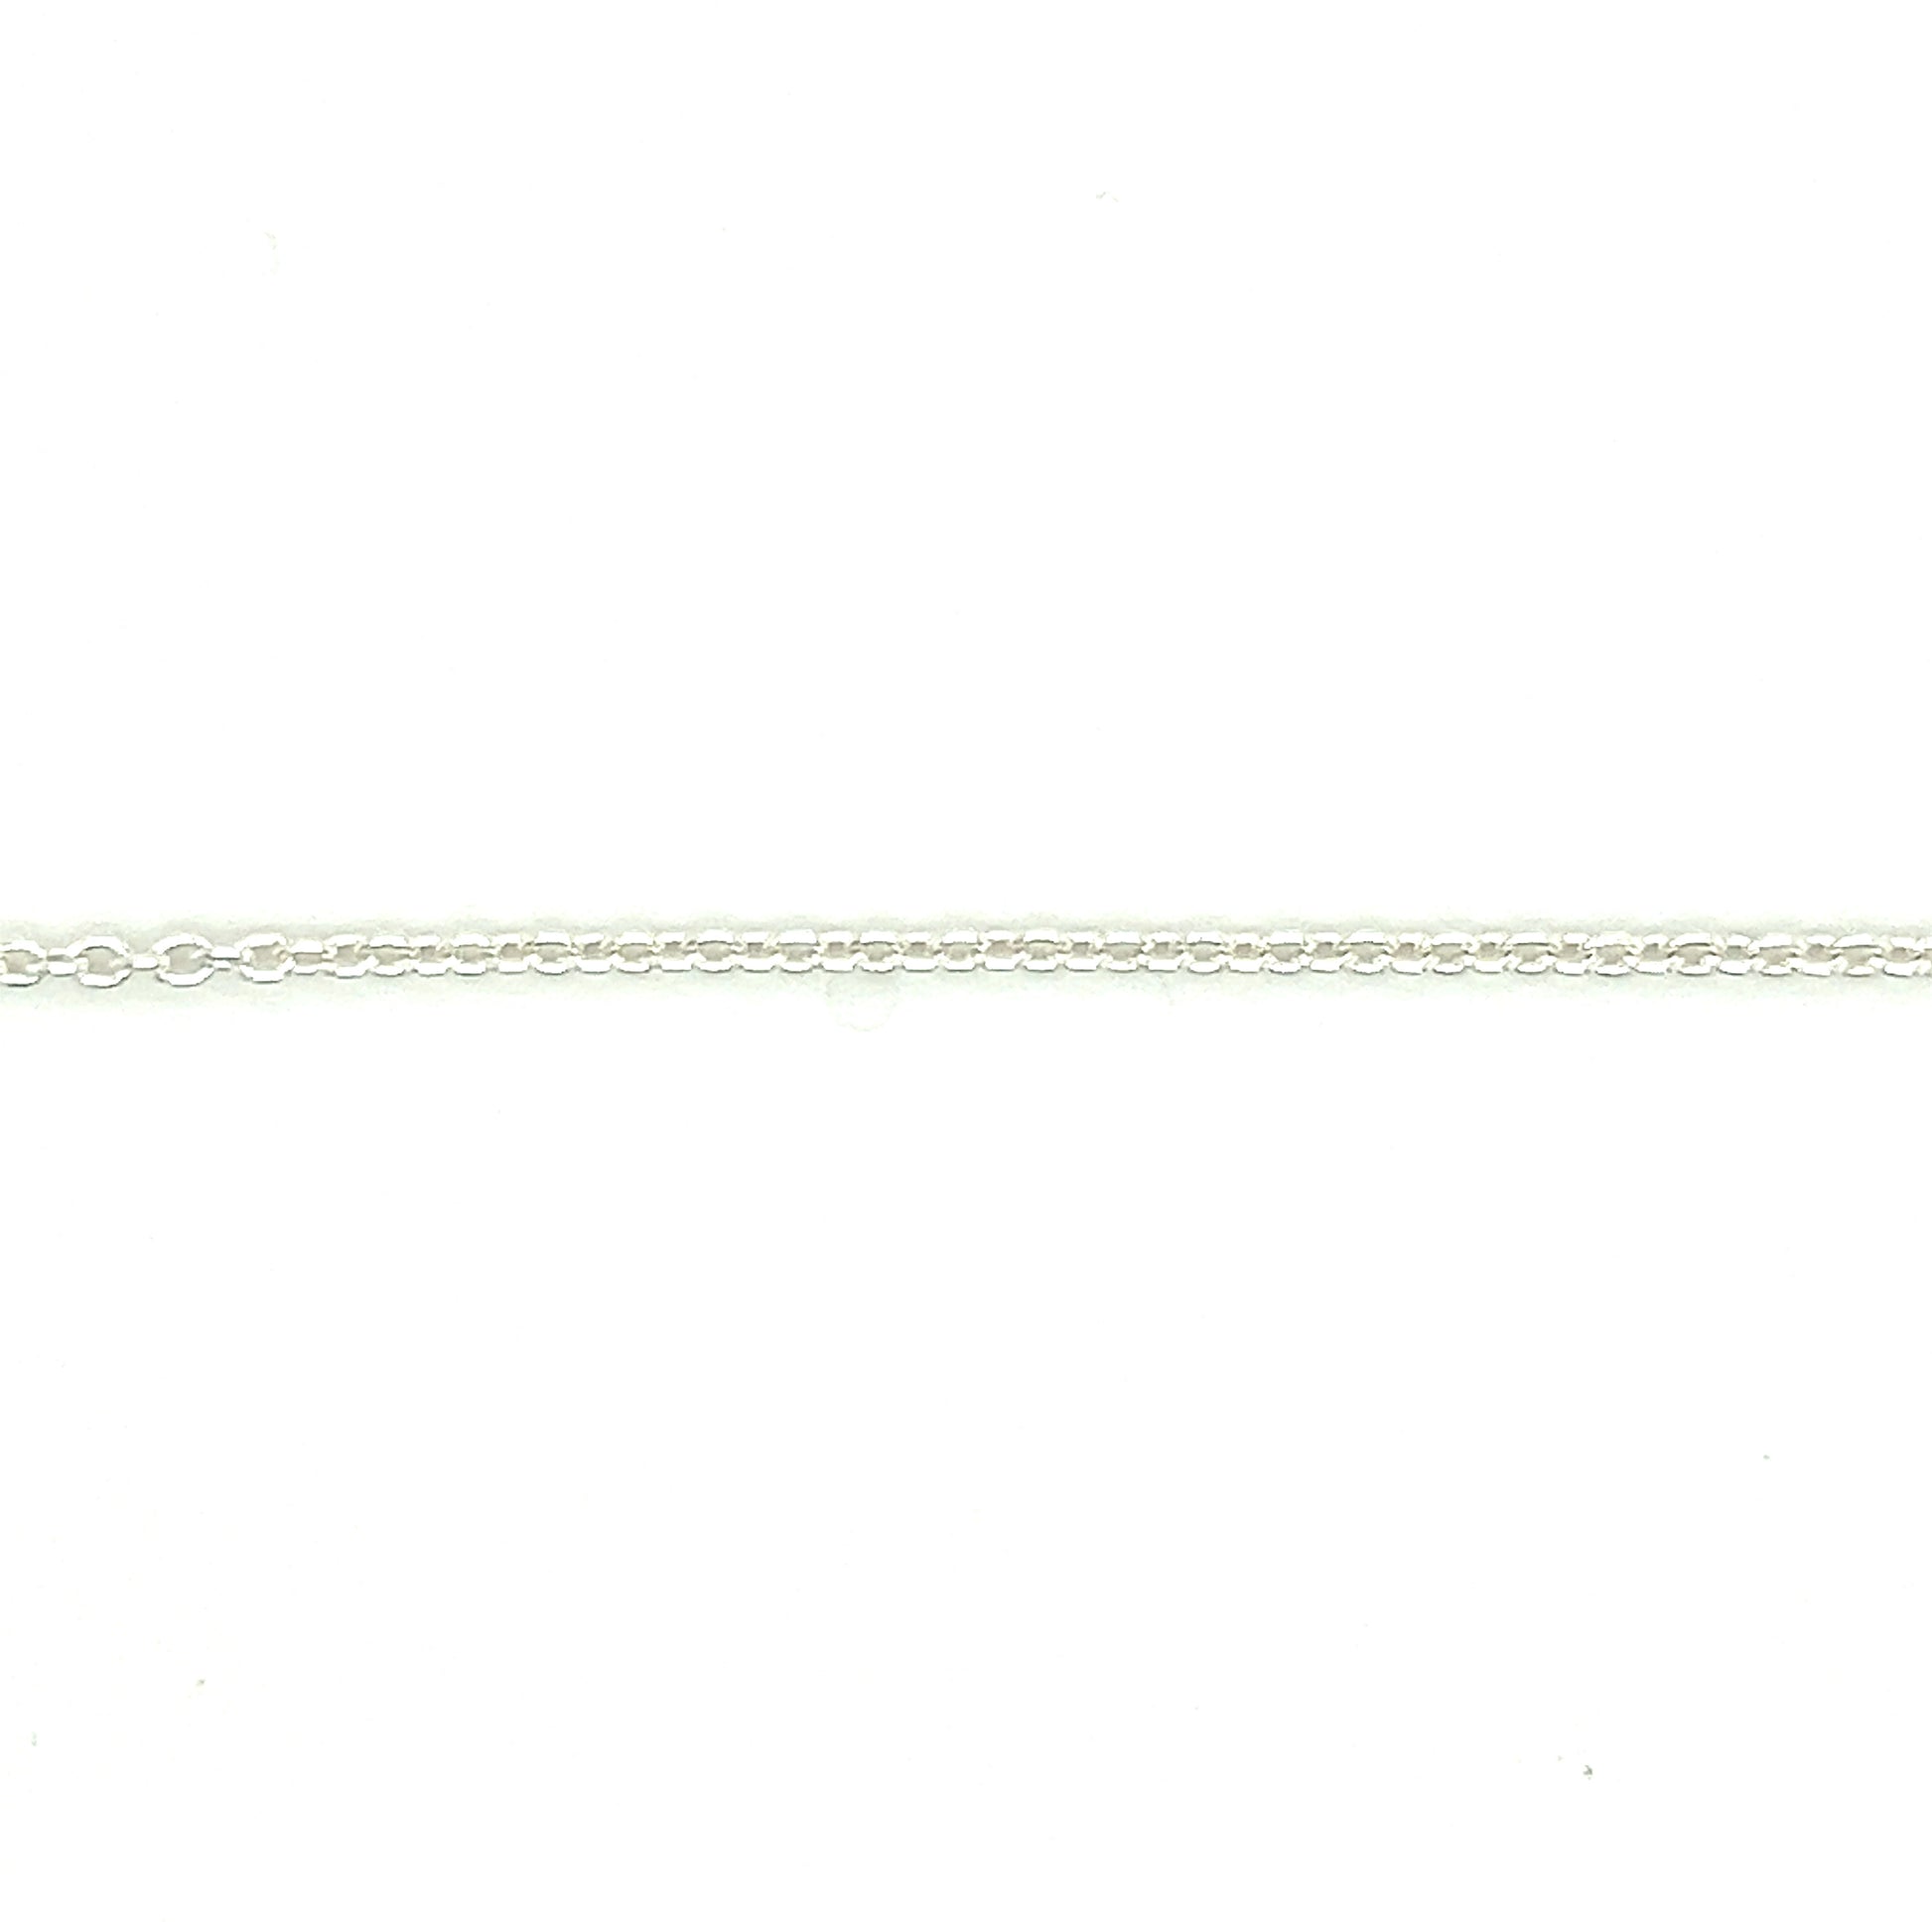 Cable Chain 1.5mm in Sterling Silver Chain View